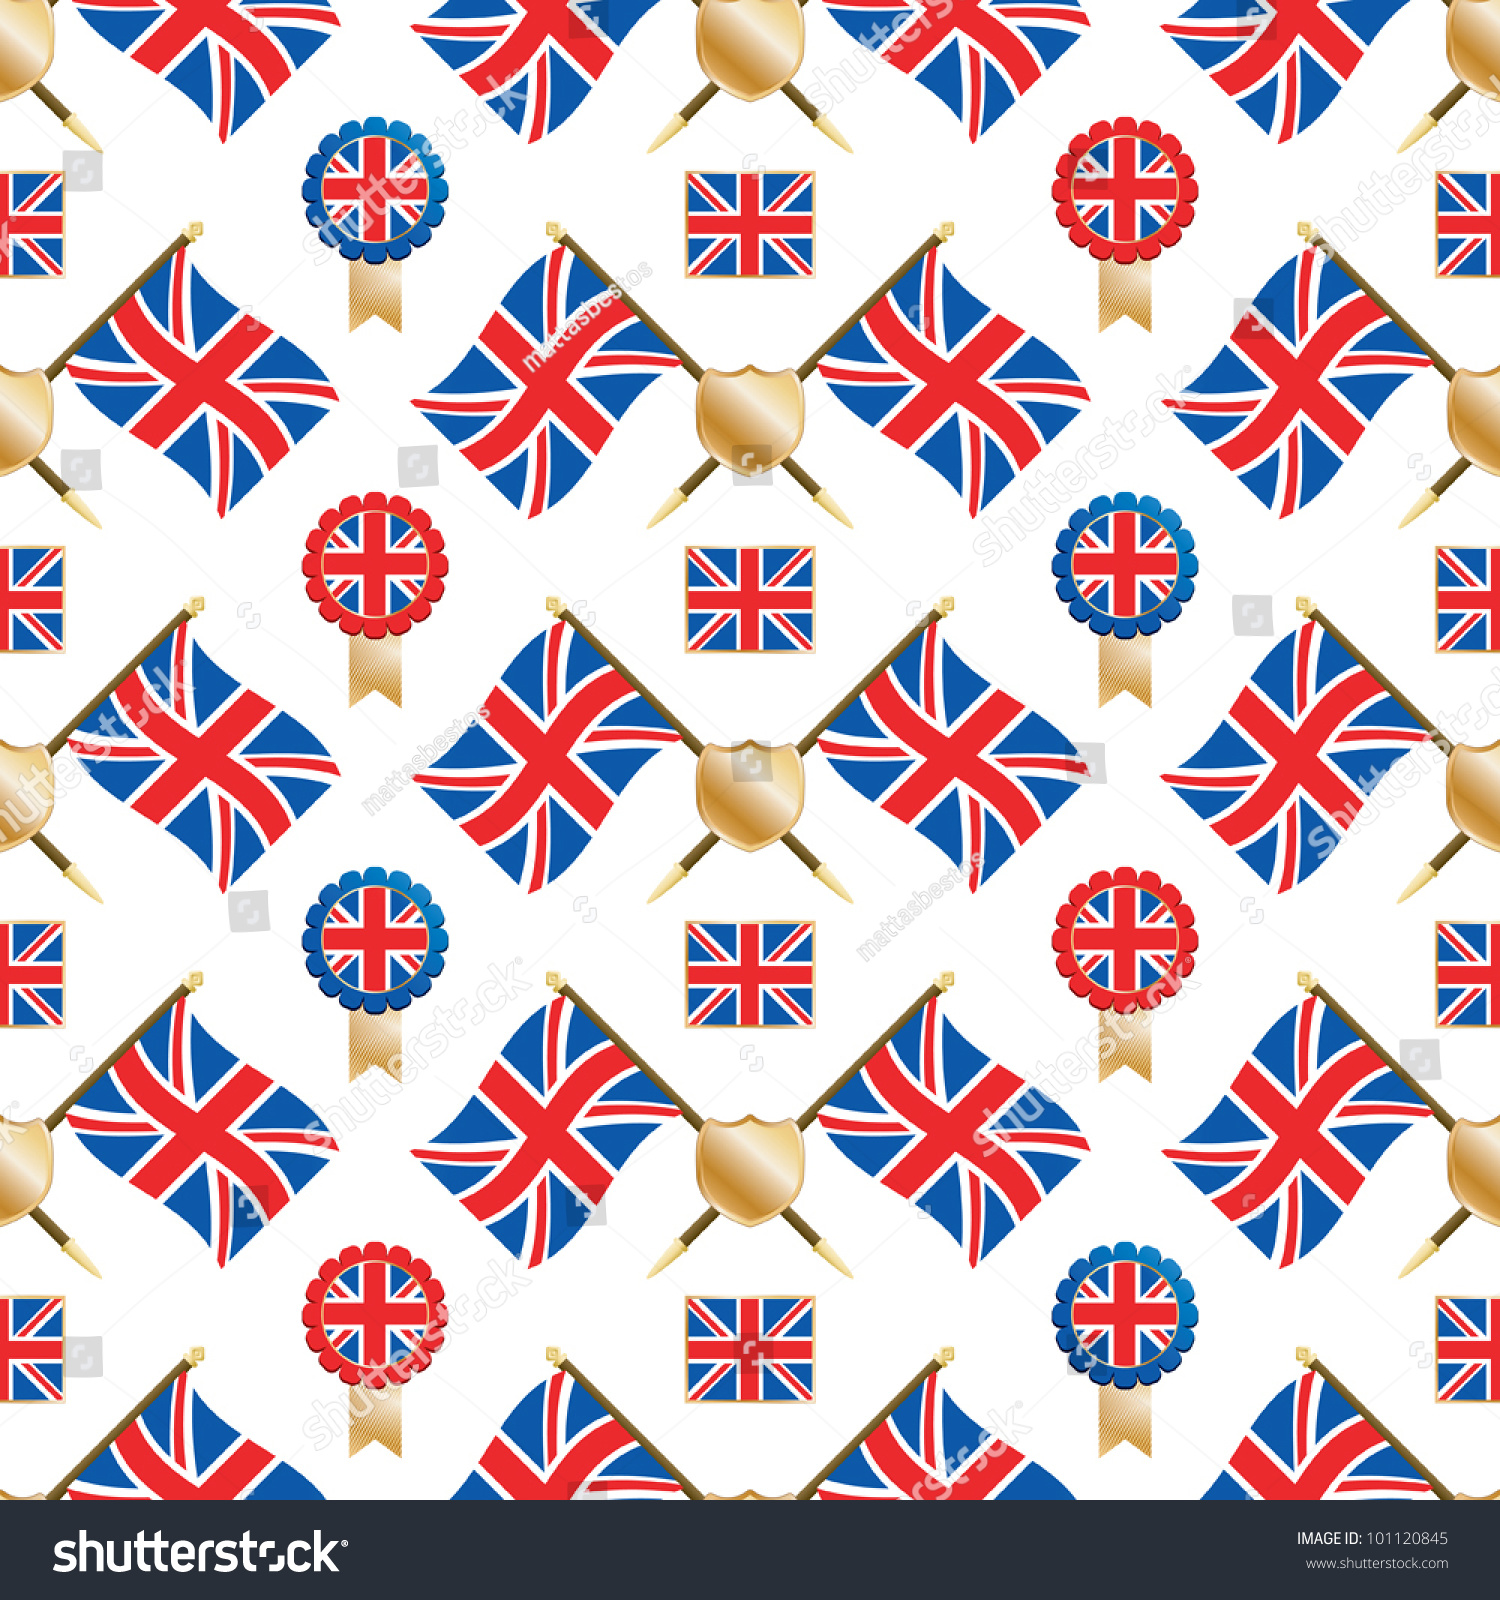 Seamless Pattern Of Union Jack Flags And Emblems, With Clipping Path ...